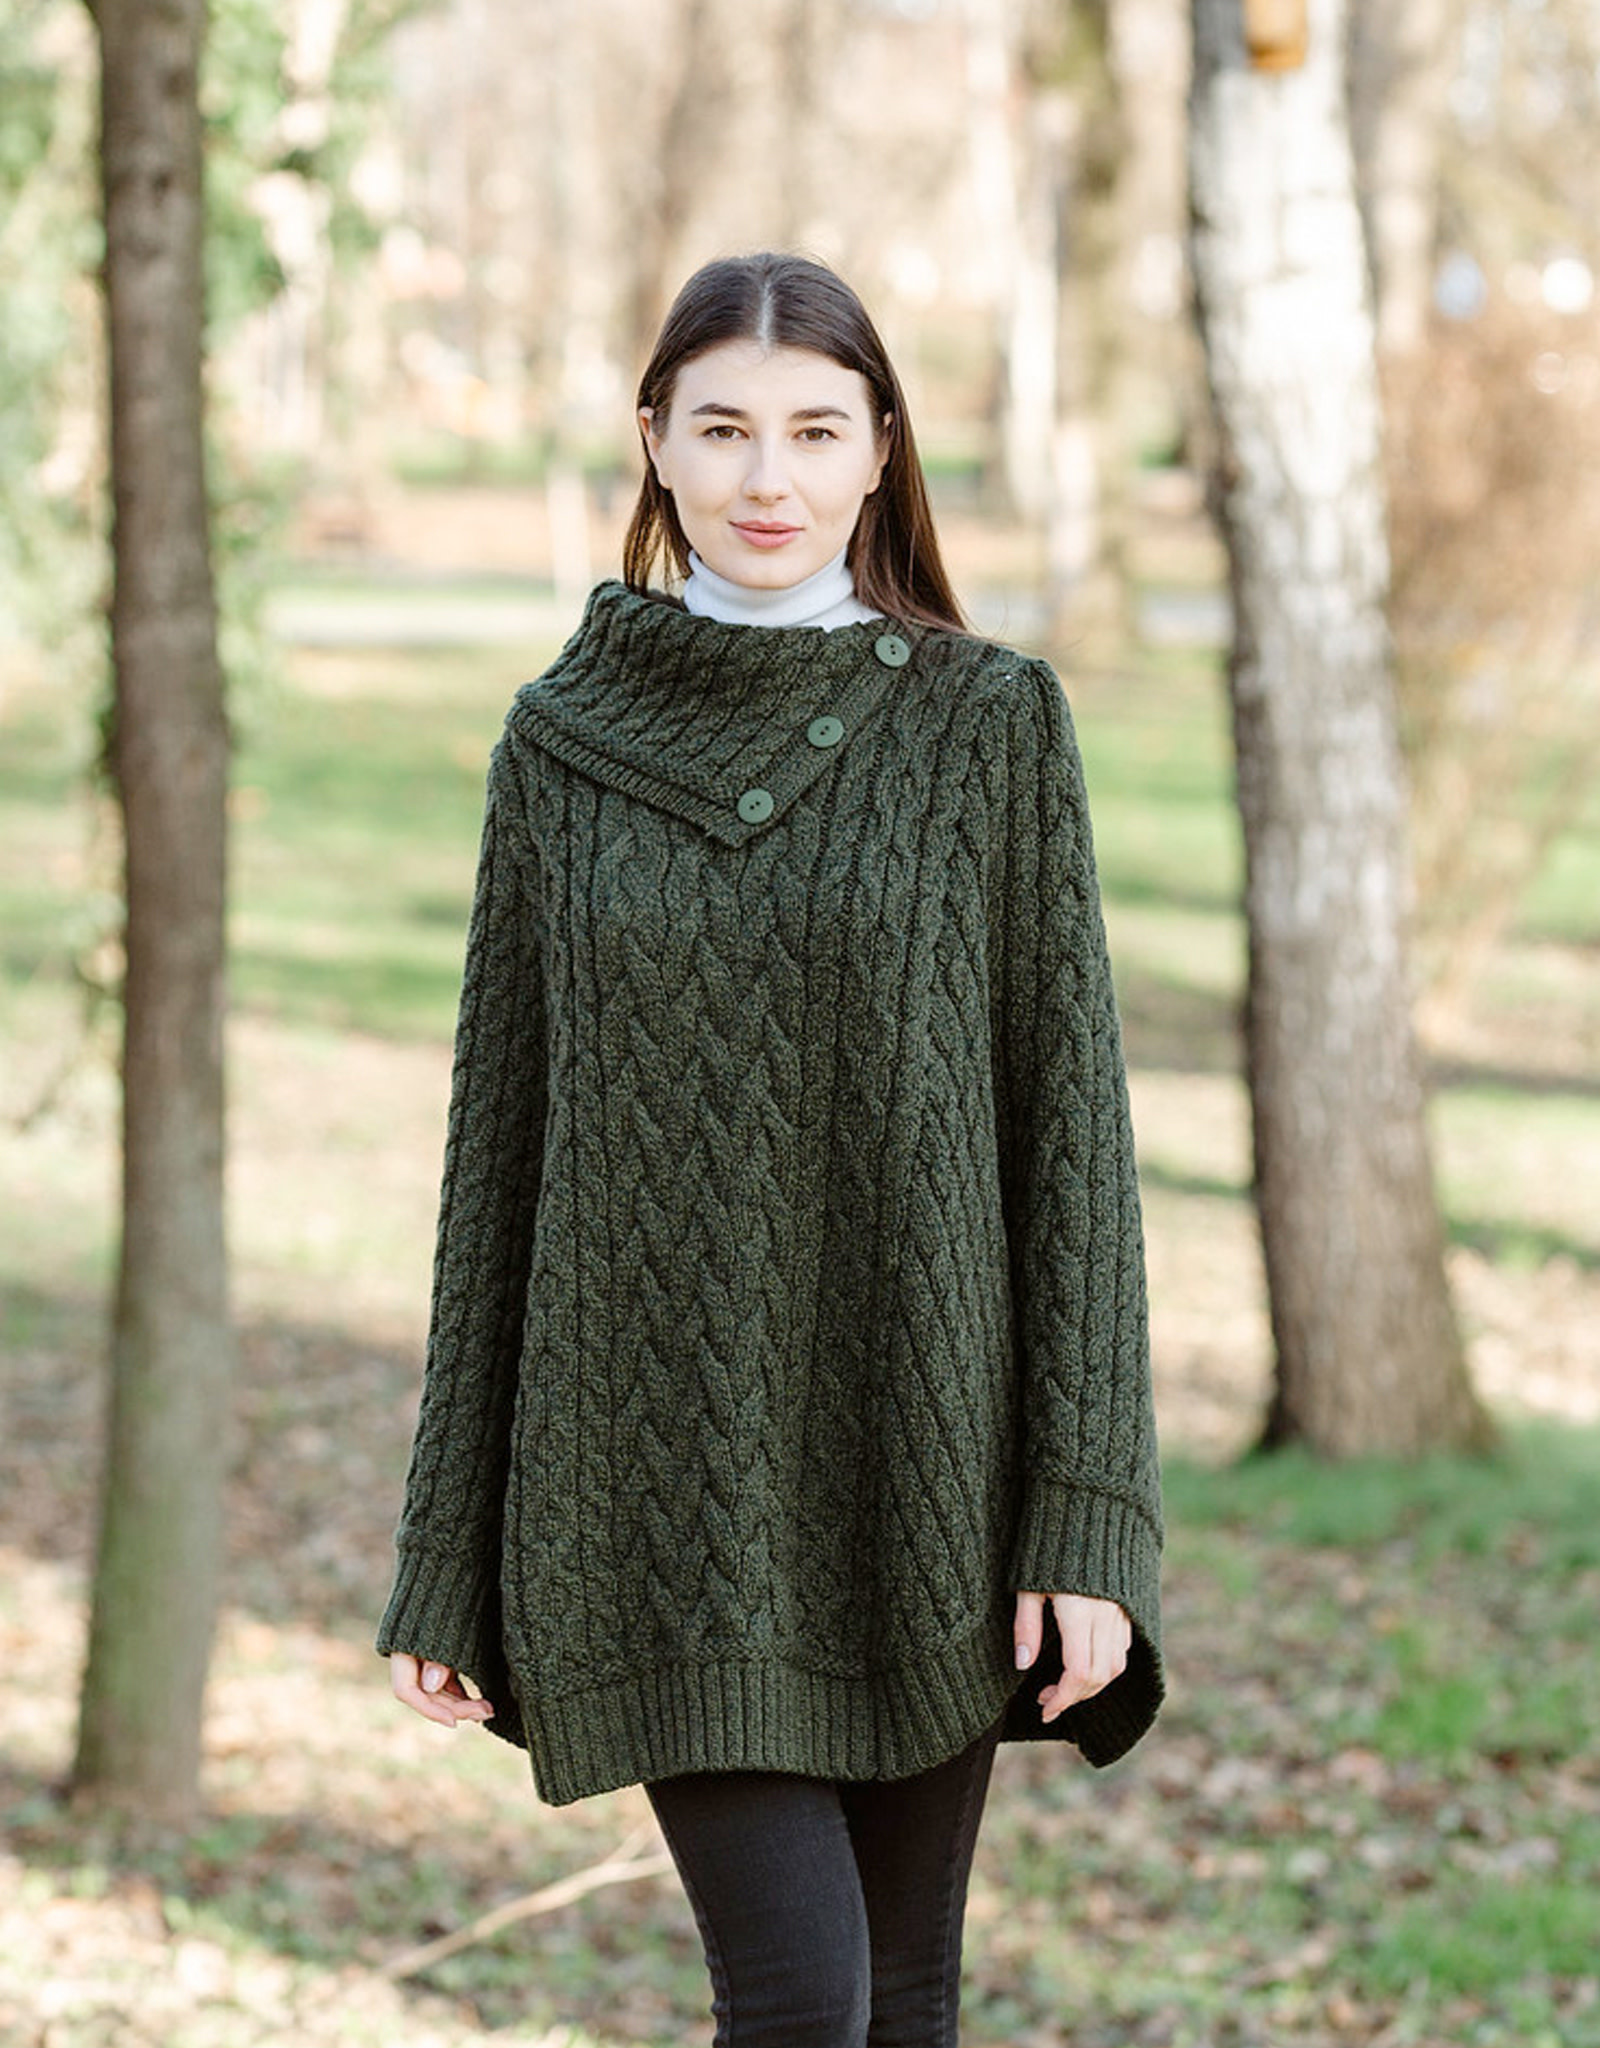 CAPES & RUANAS SAOL COWL NECK BUTTON PONCHO - Army Green